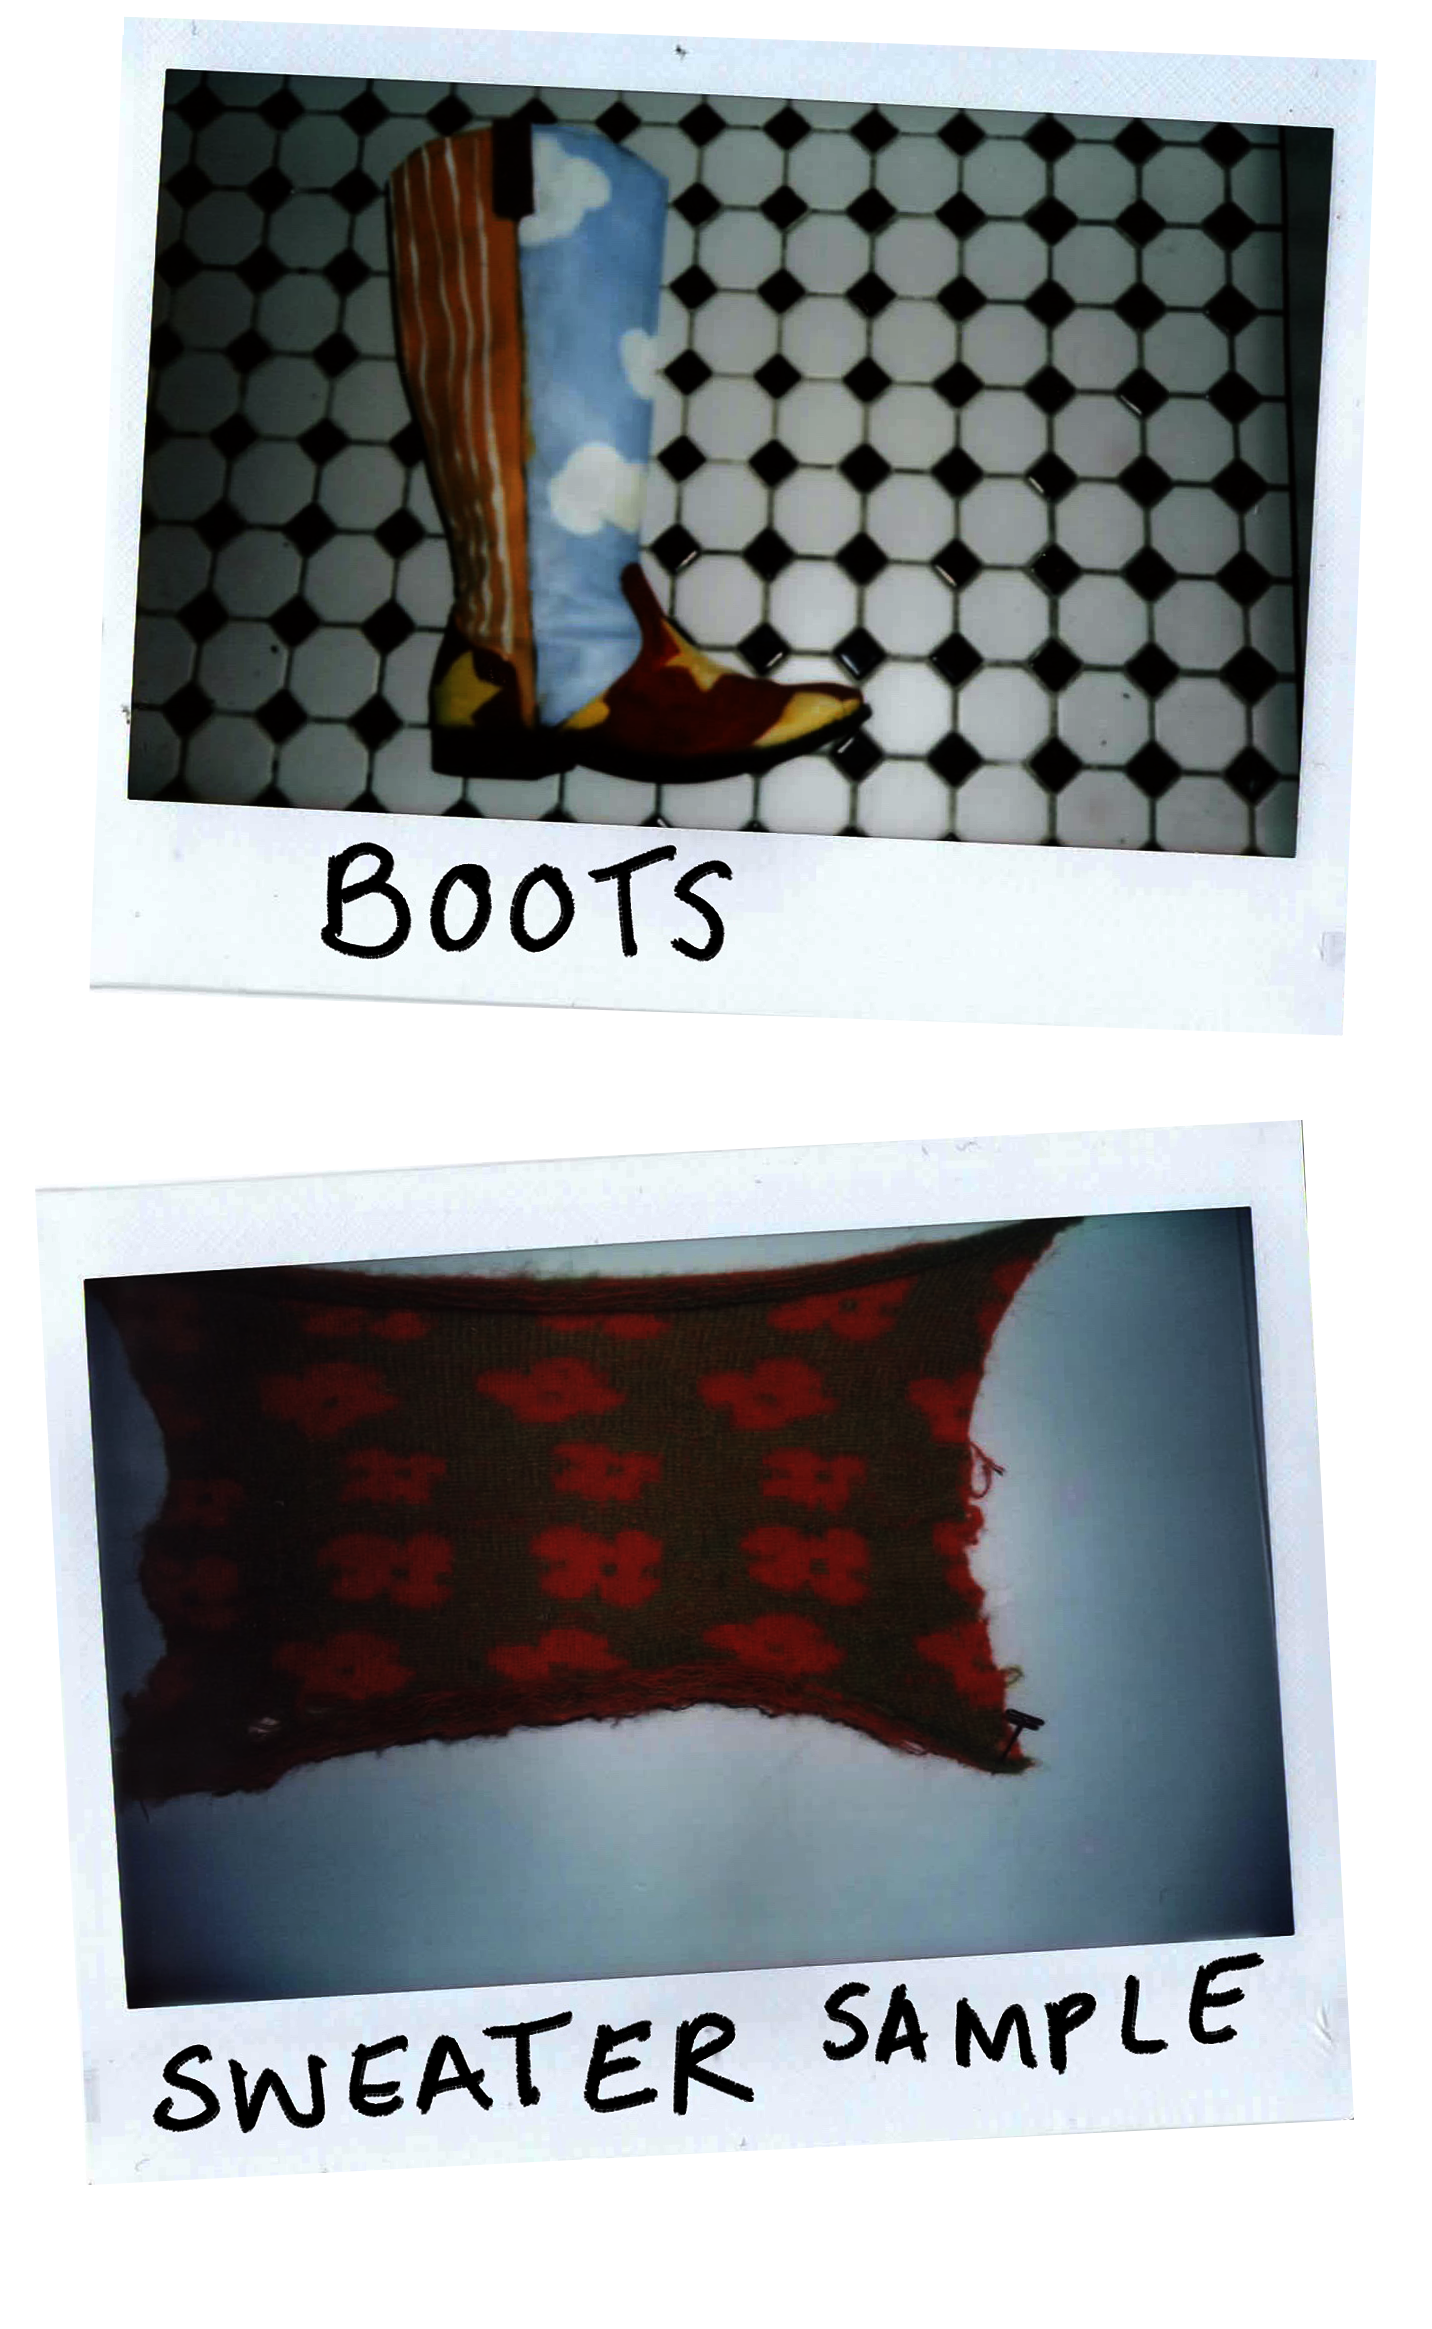 boots and sweater sample